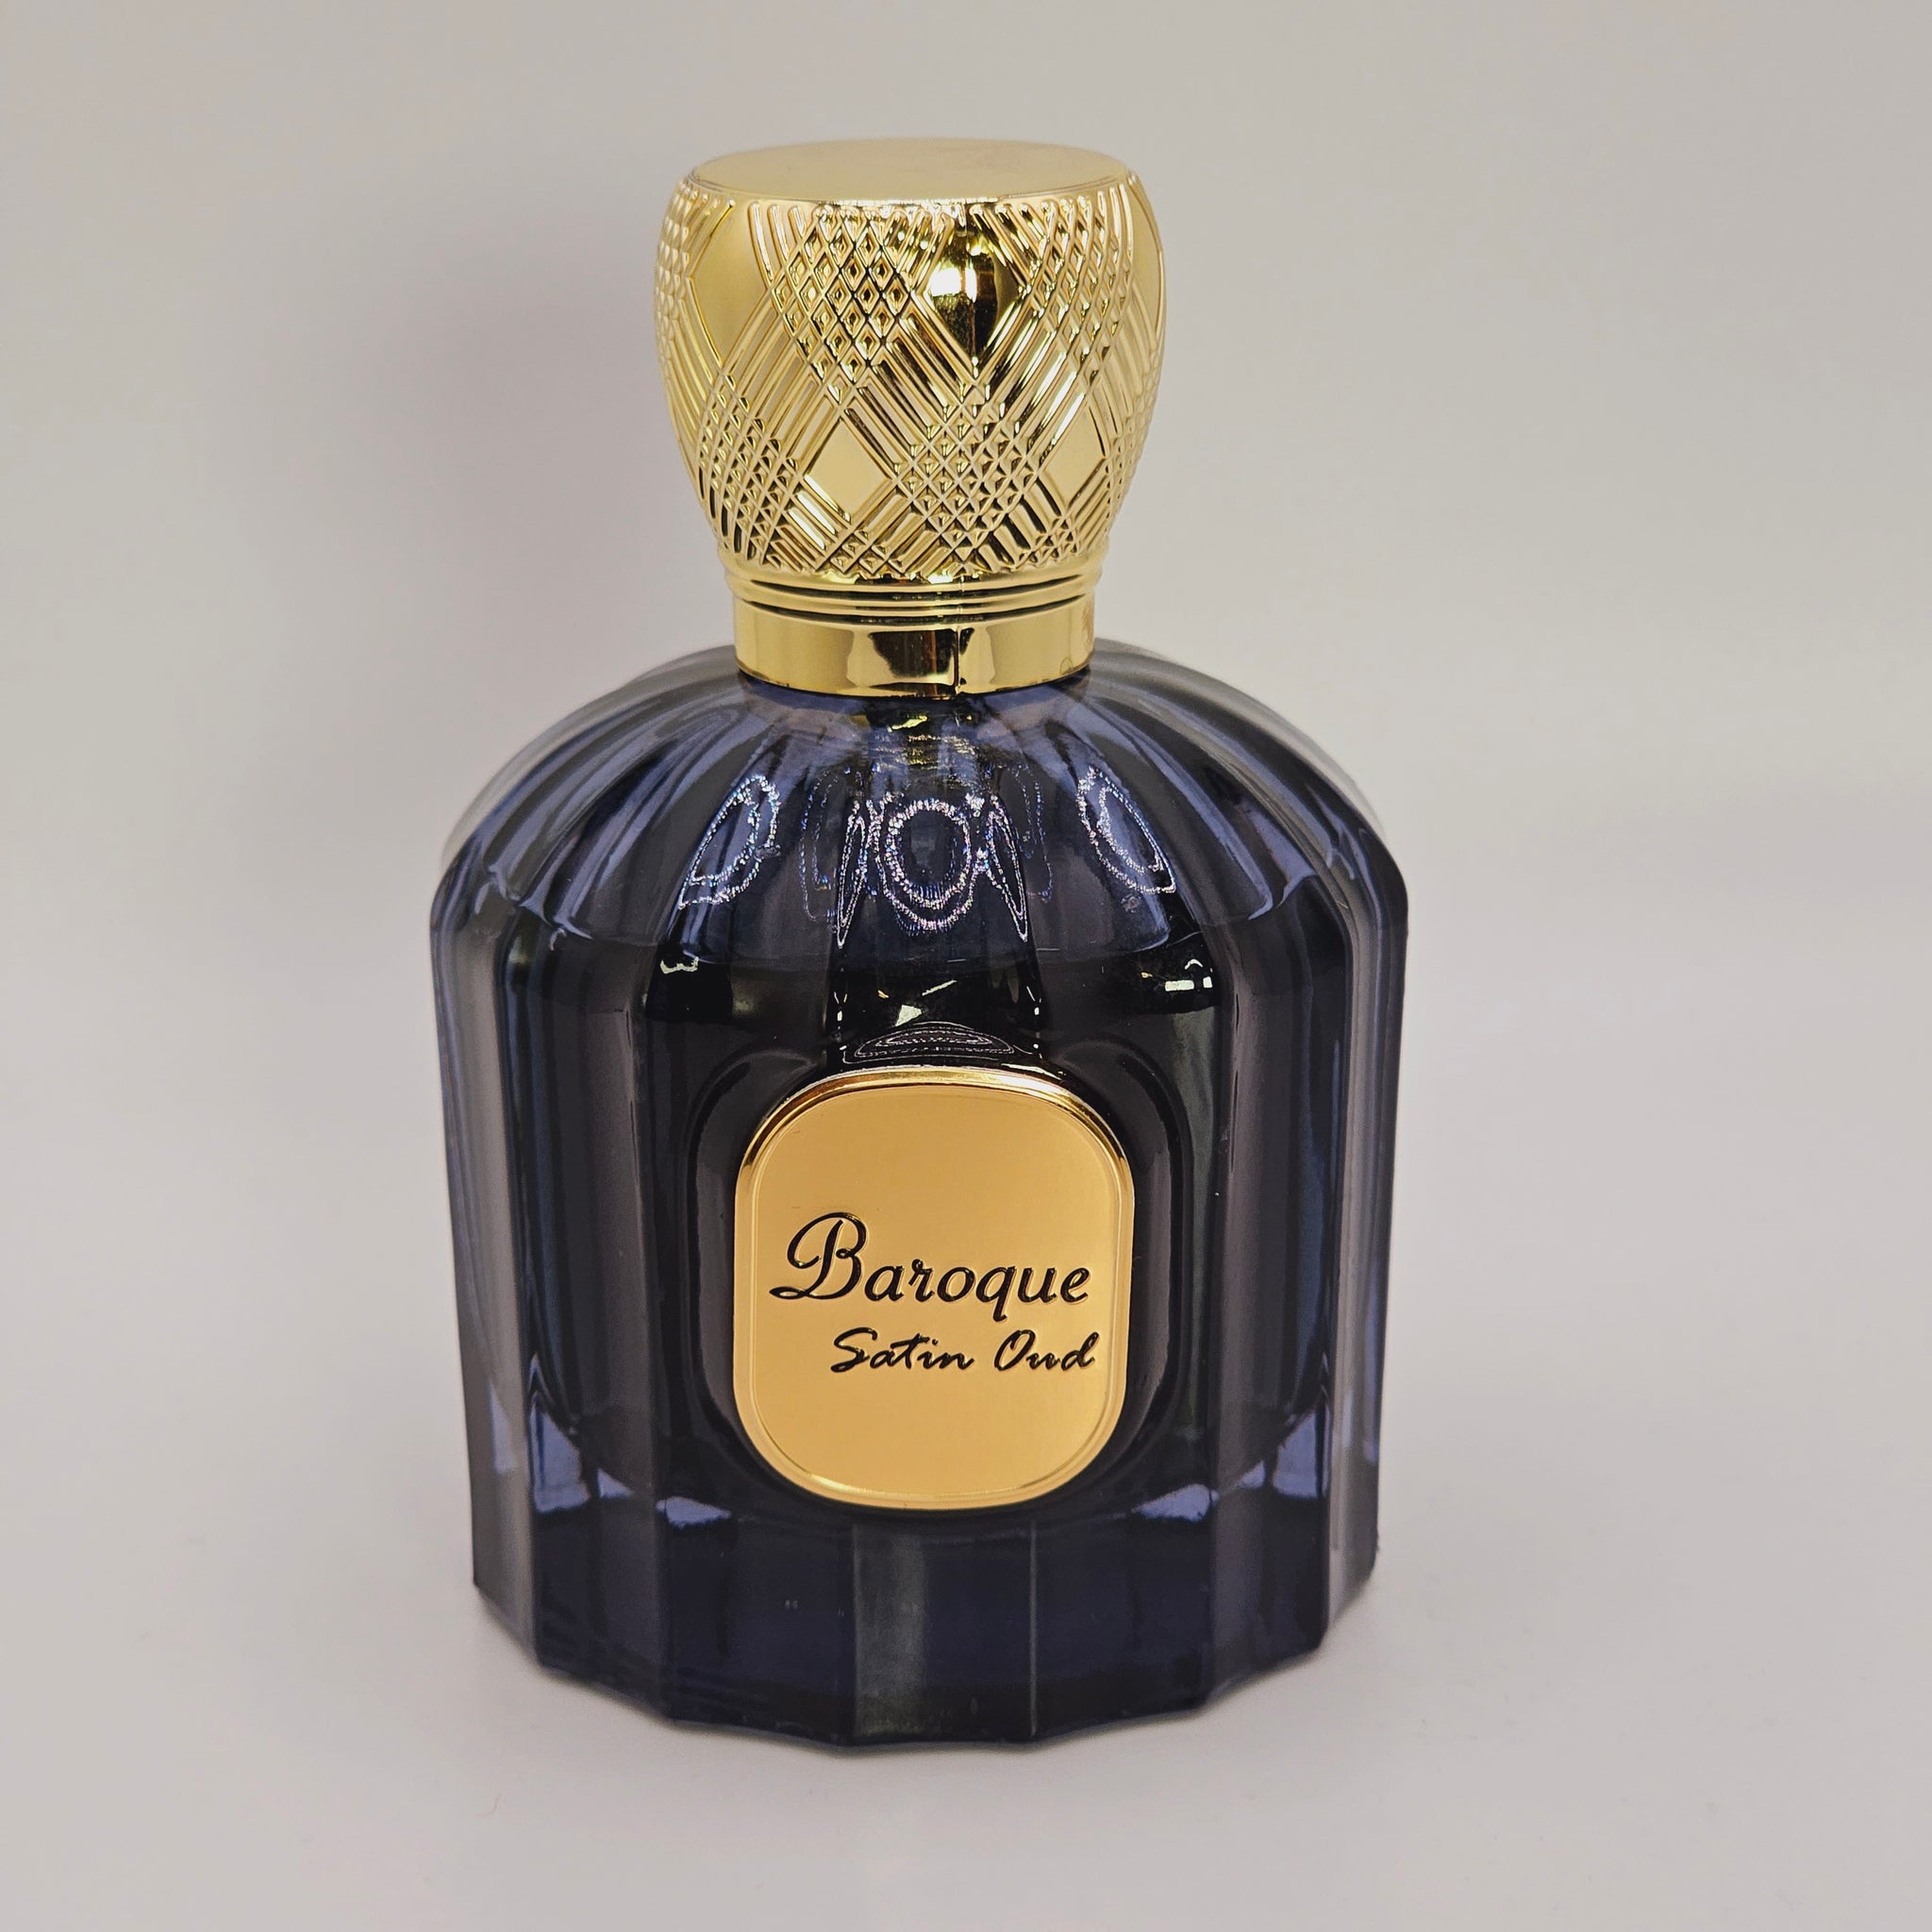 Baroque Satin Oud Perfume by Maison Alhambra Inspired by Maison